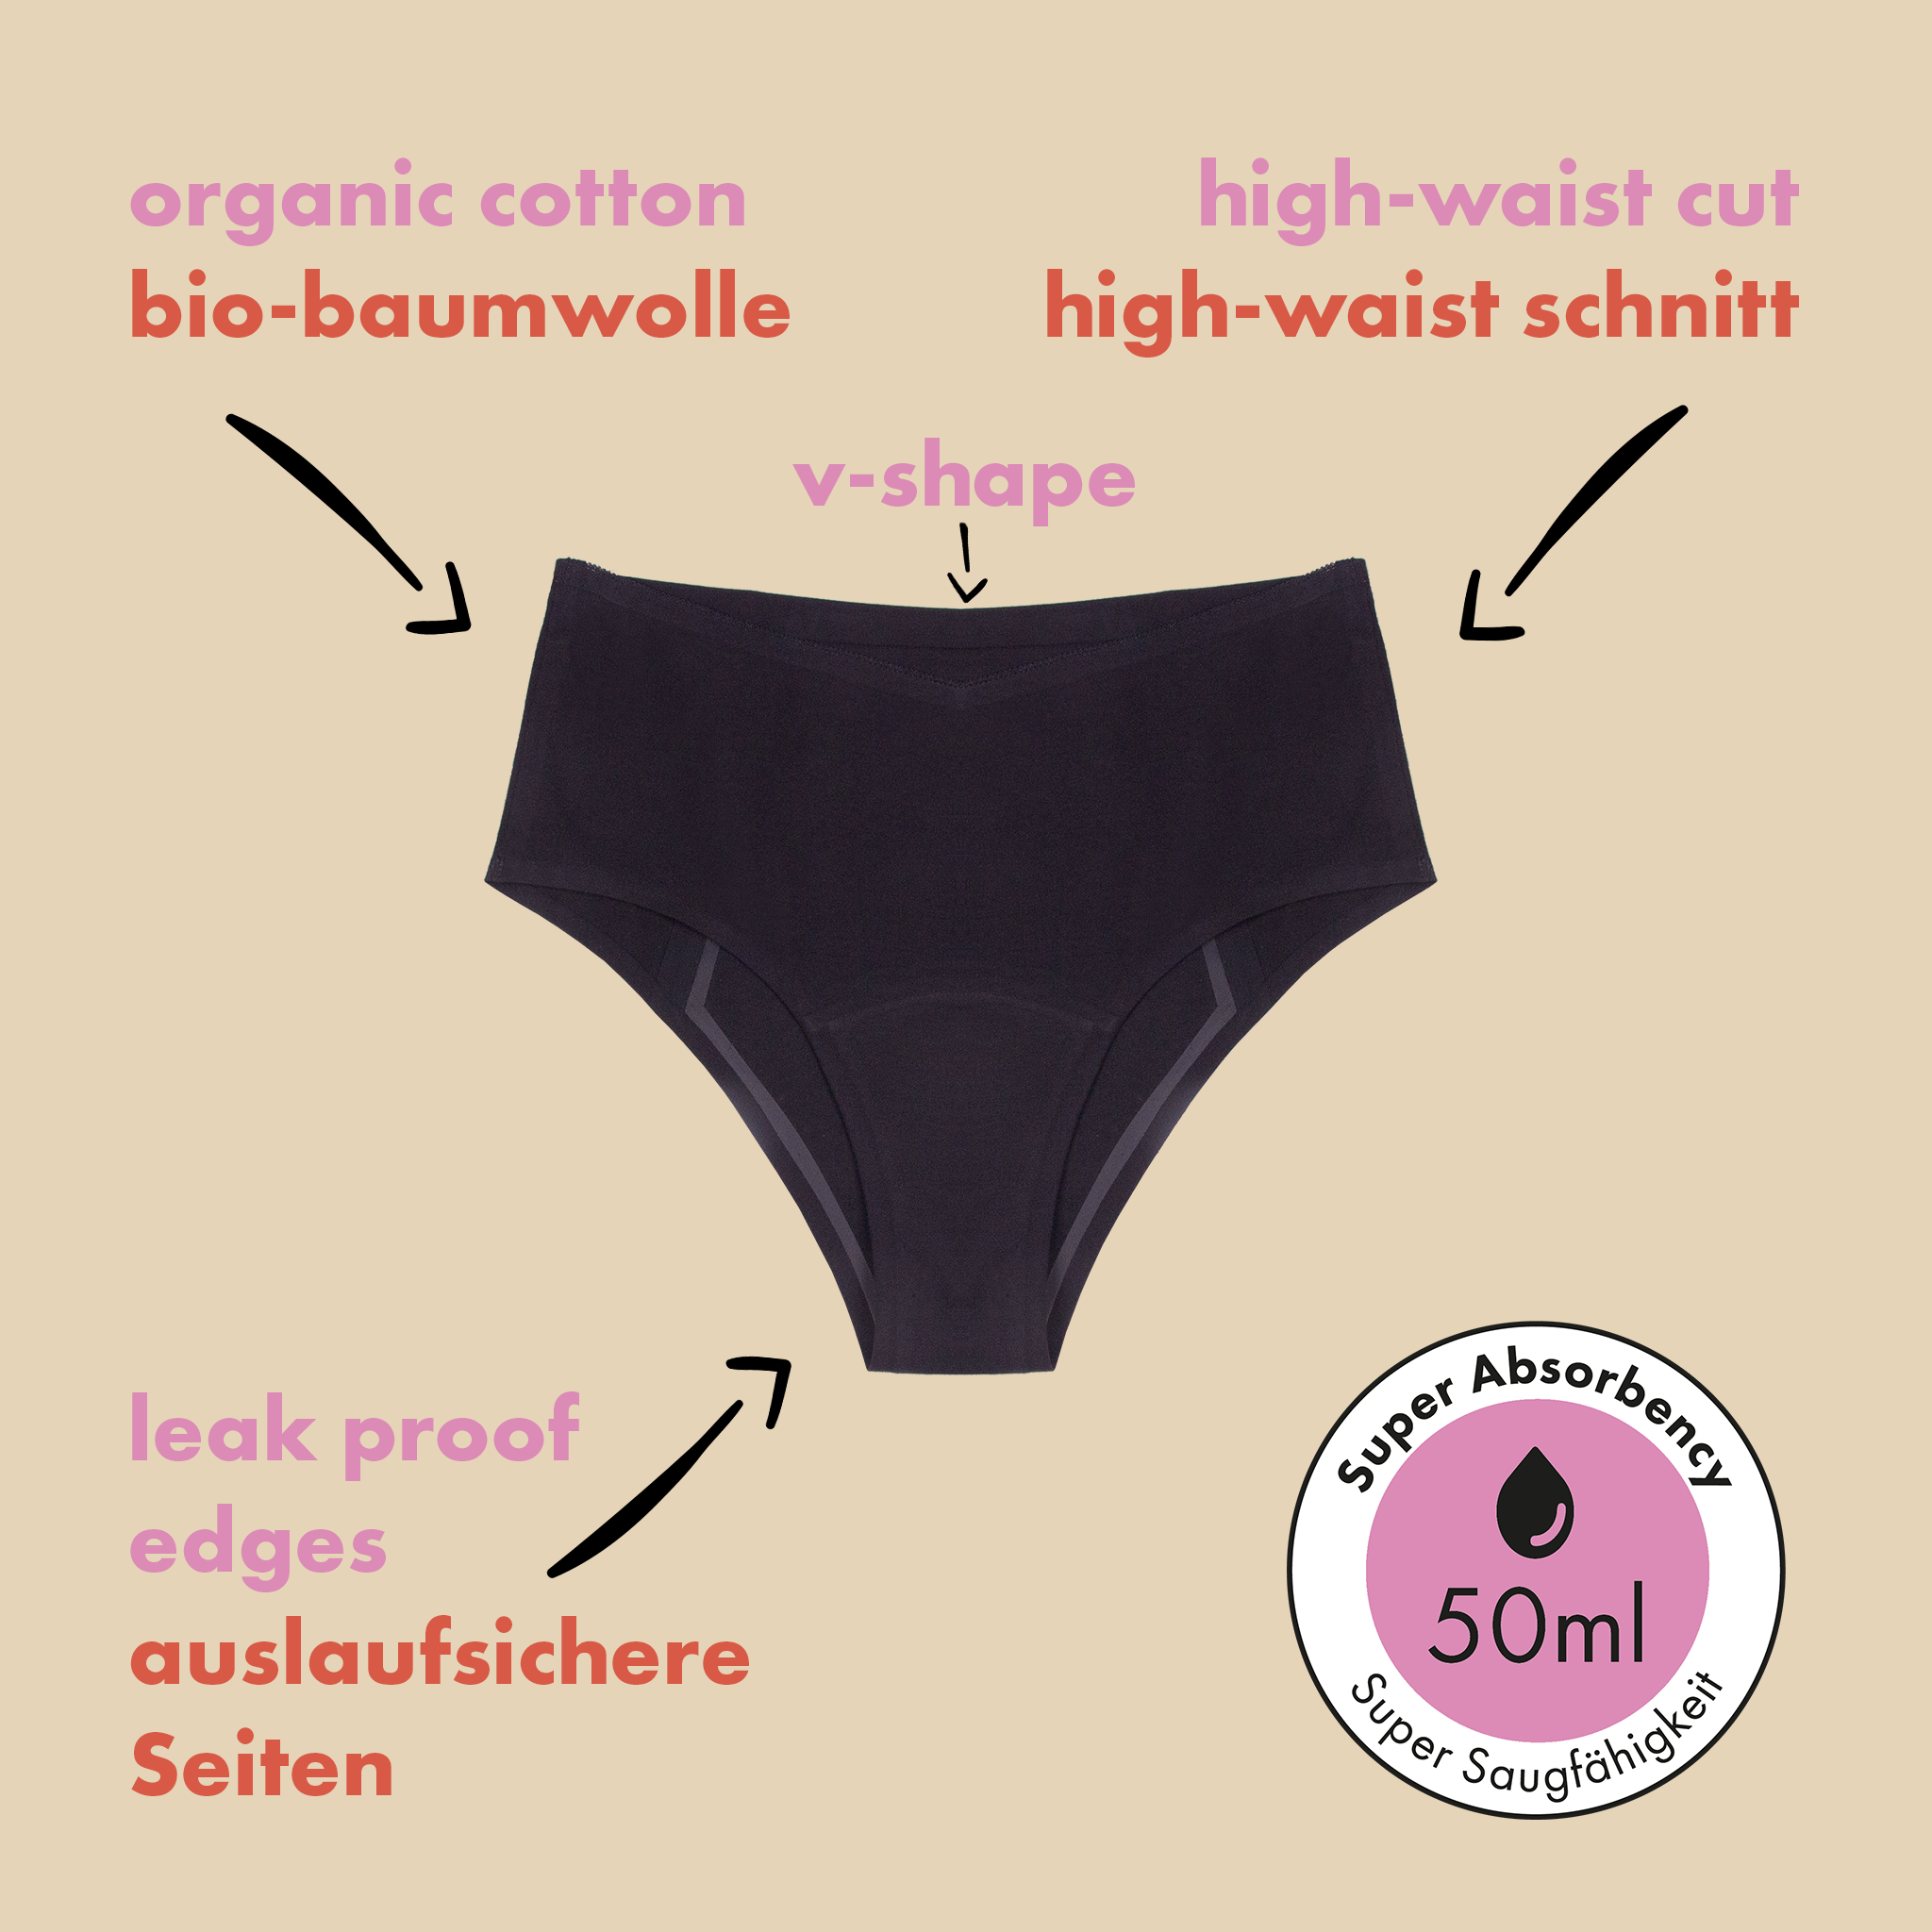 dais maternity absorbent underwear in high waist cut in black. Showing product benefits of organic cotton, high-waist cut, v shape, leak proof edges, super absorbency of 50ml. 